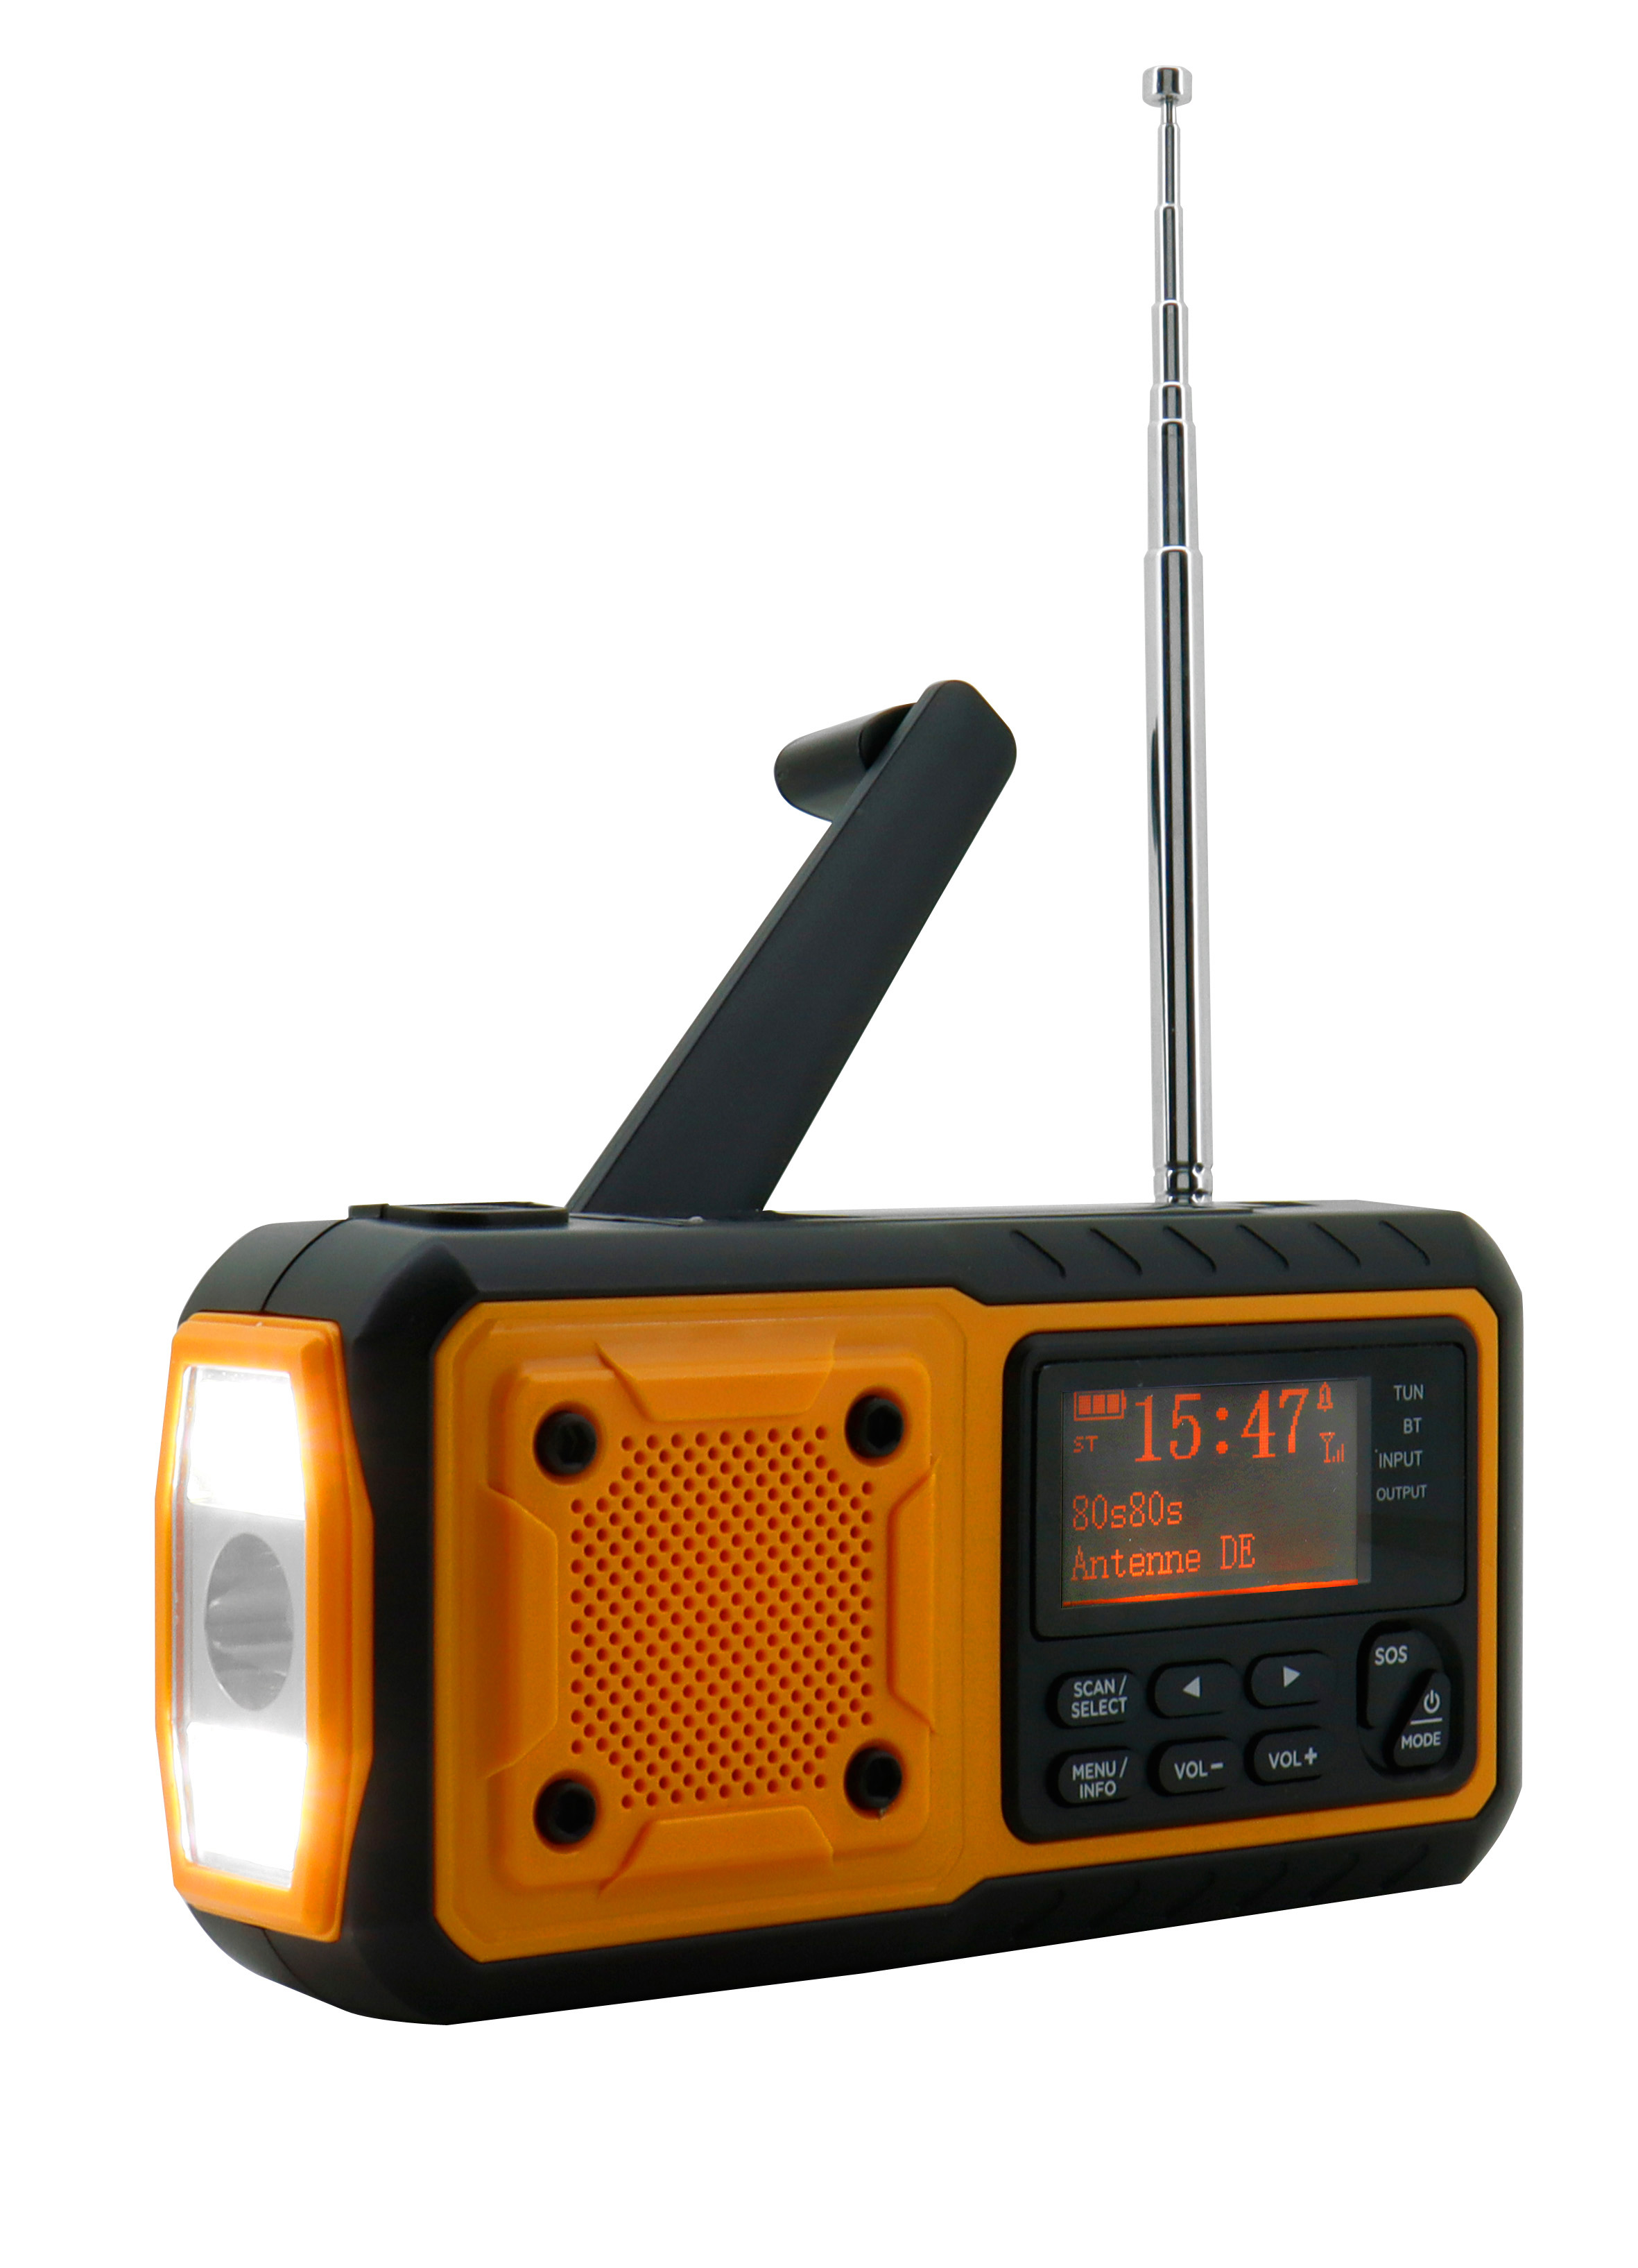 LED digital solar Li-Ion lights radio Bluetooth® battery, panel/dynamo, emergency and built-in with DAB+/UKW